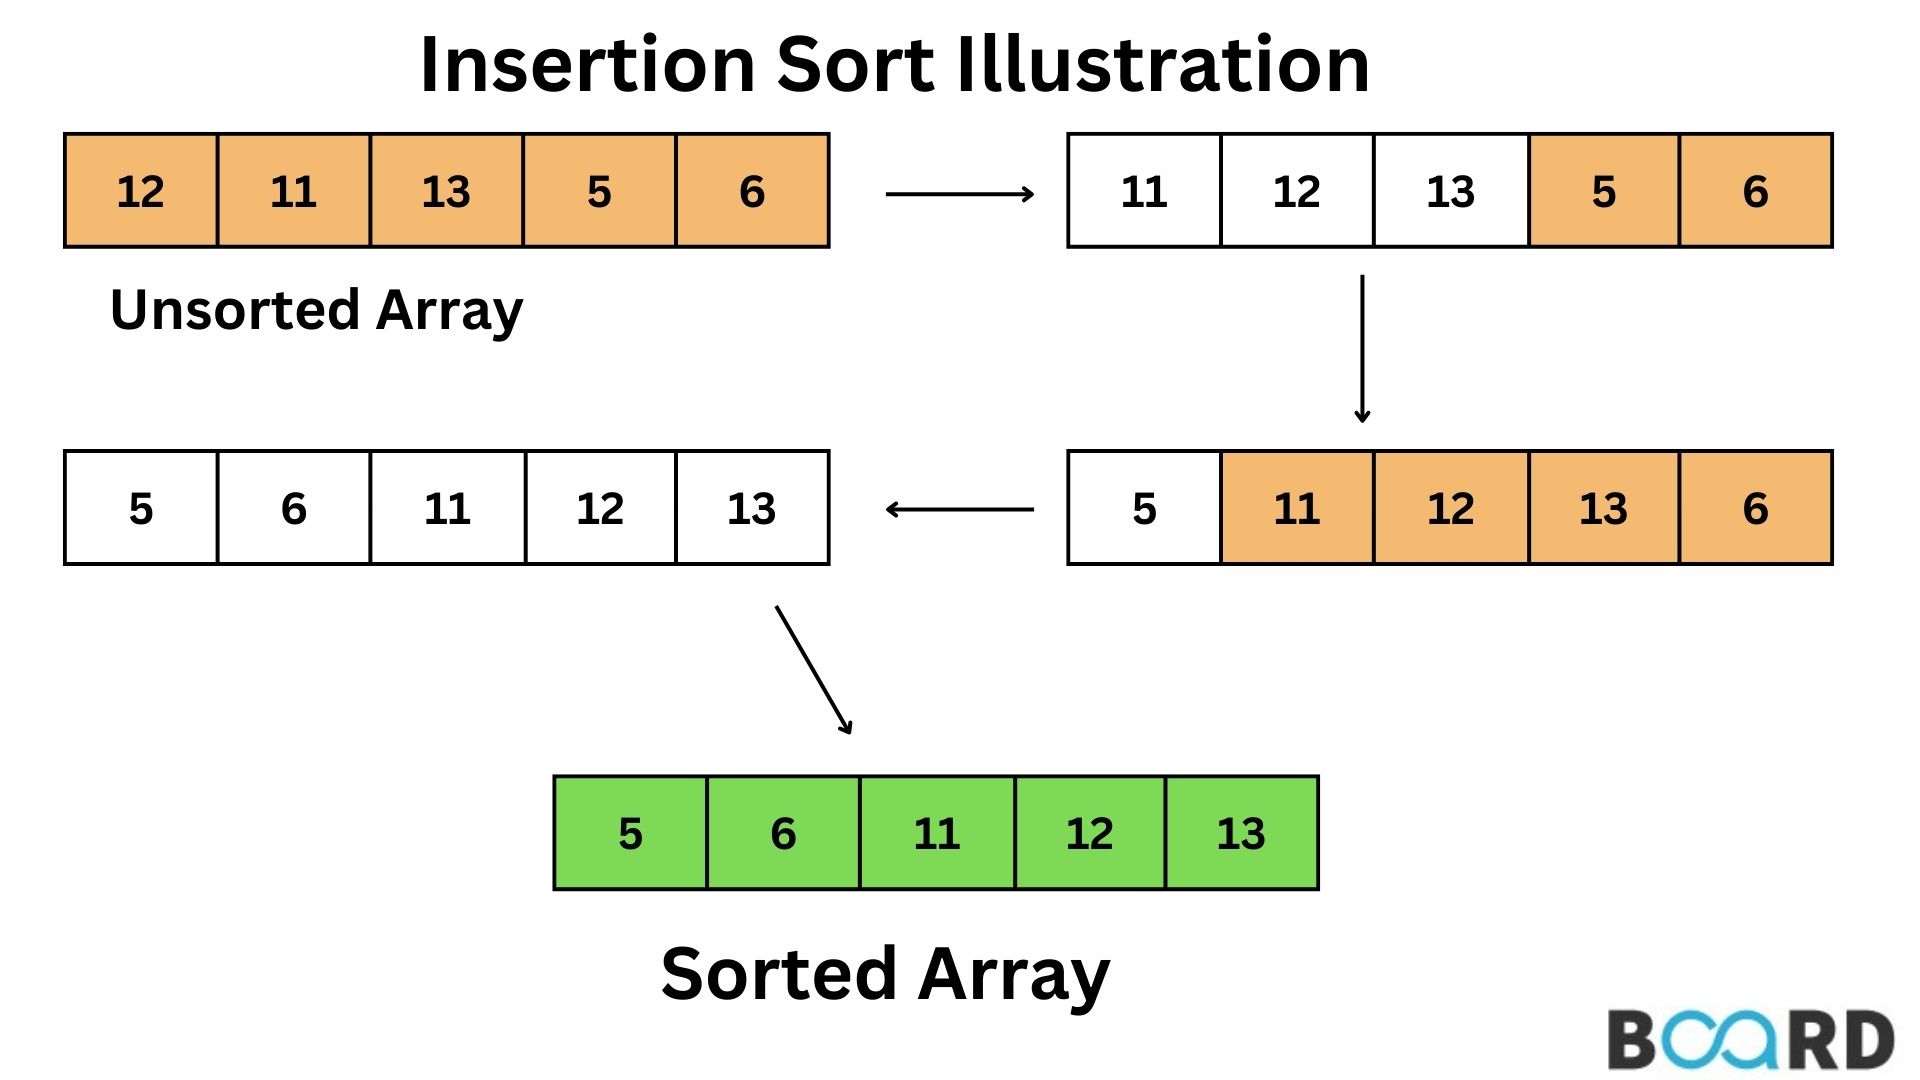 How to Perform Insertion Sort in C++?